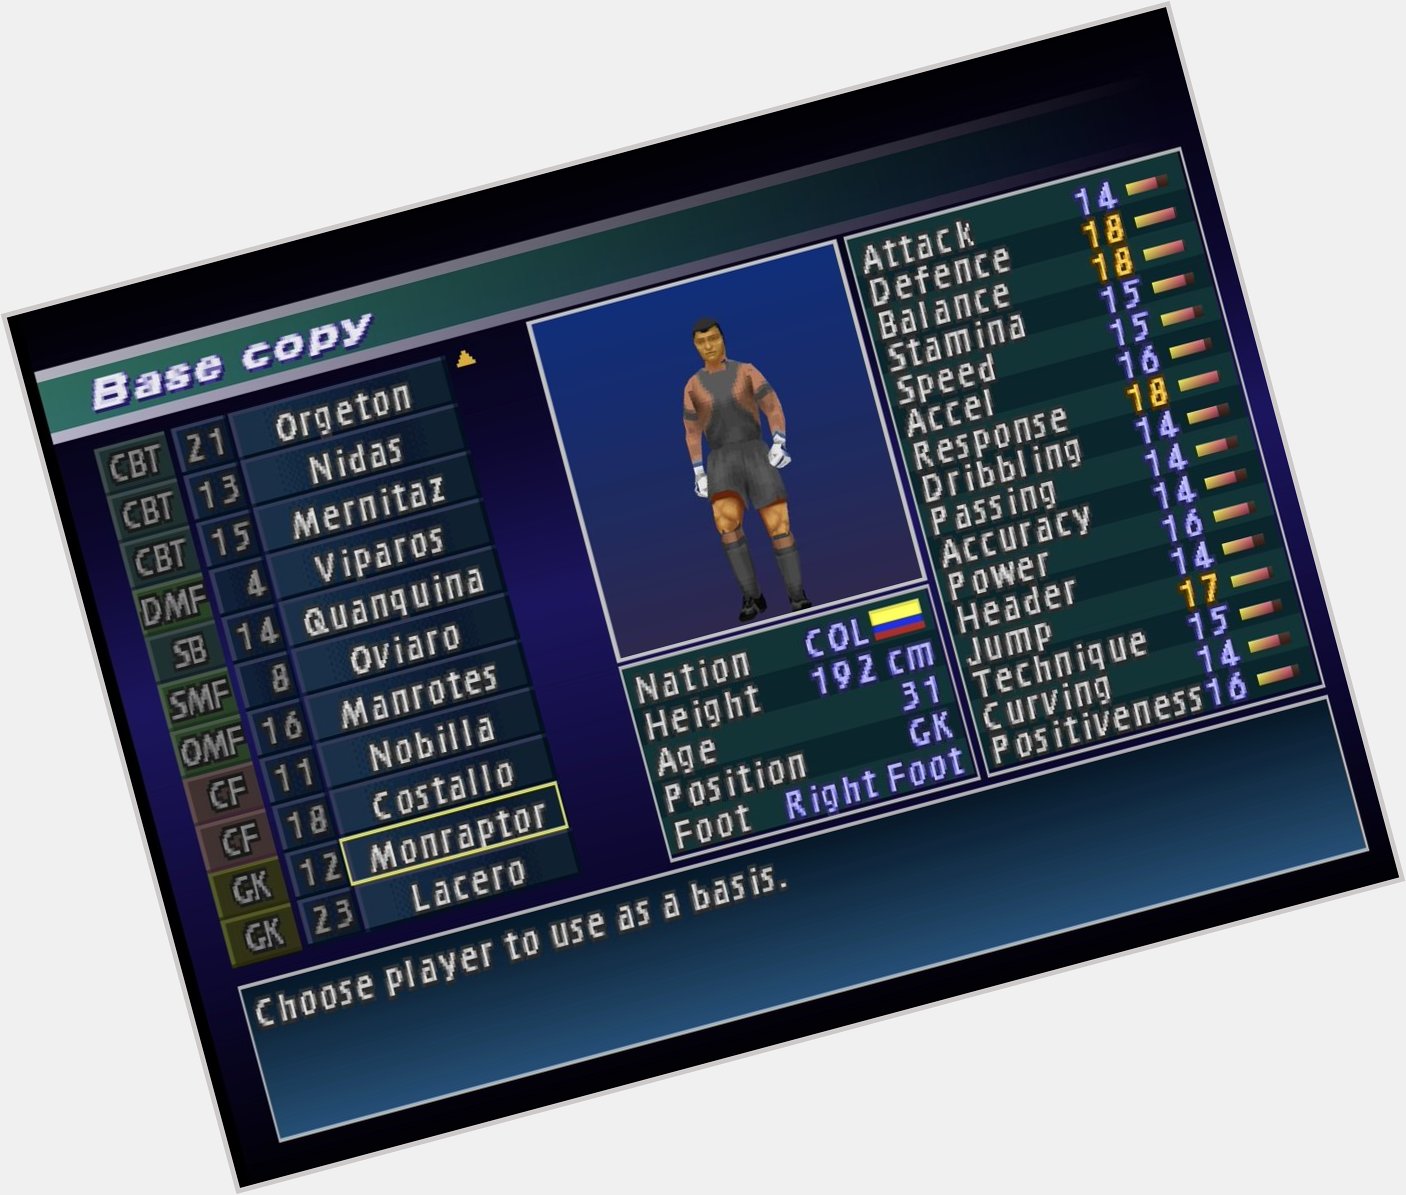  Happy birthday, Faryd Mondragón!

One of the all-time great fake PES player names...  